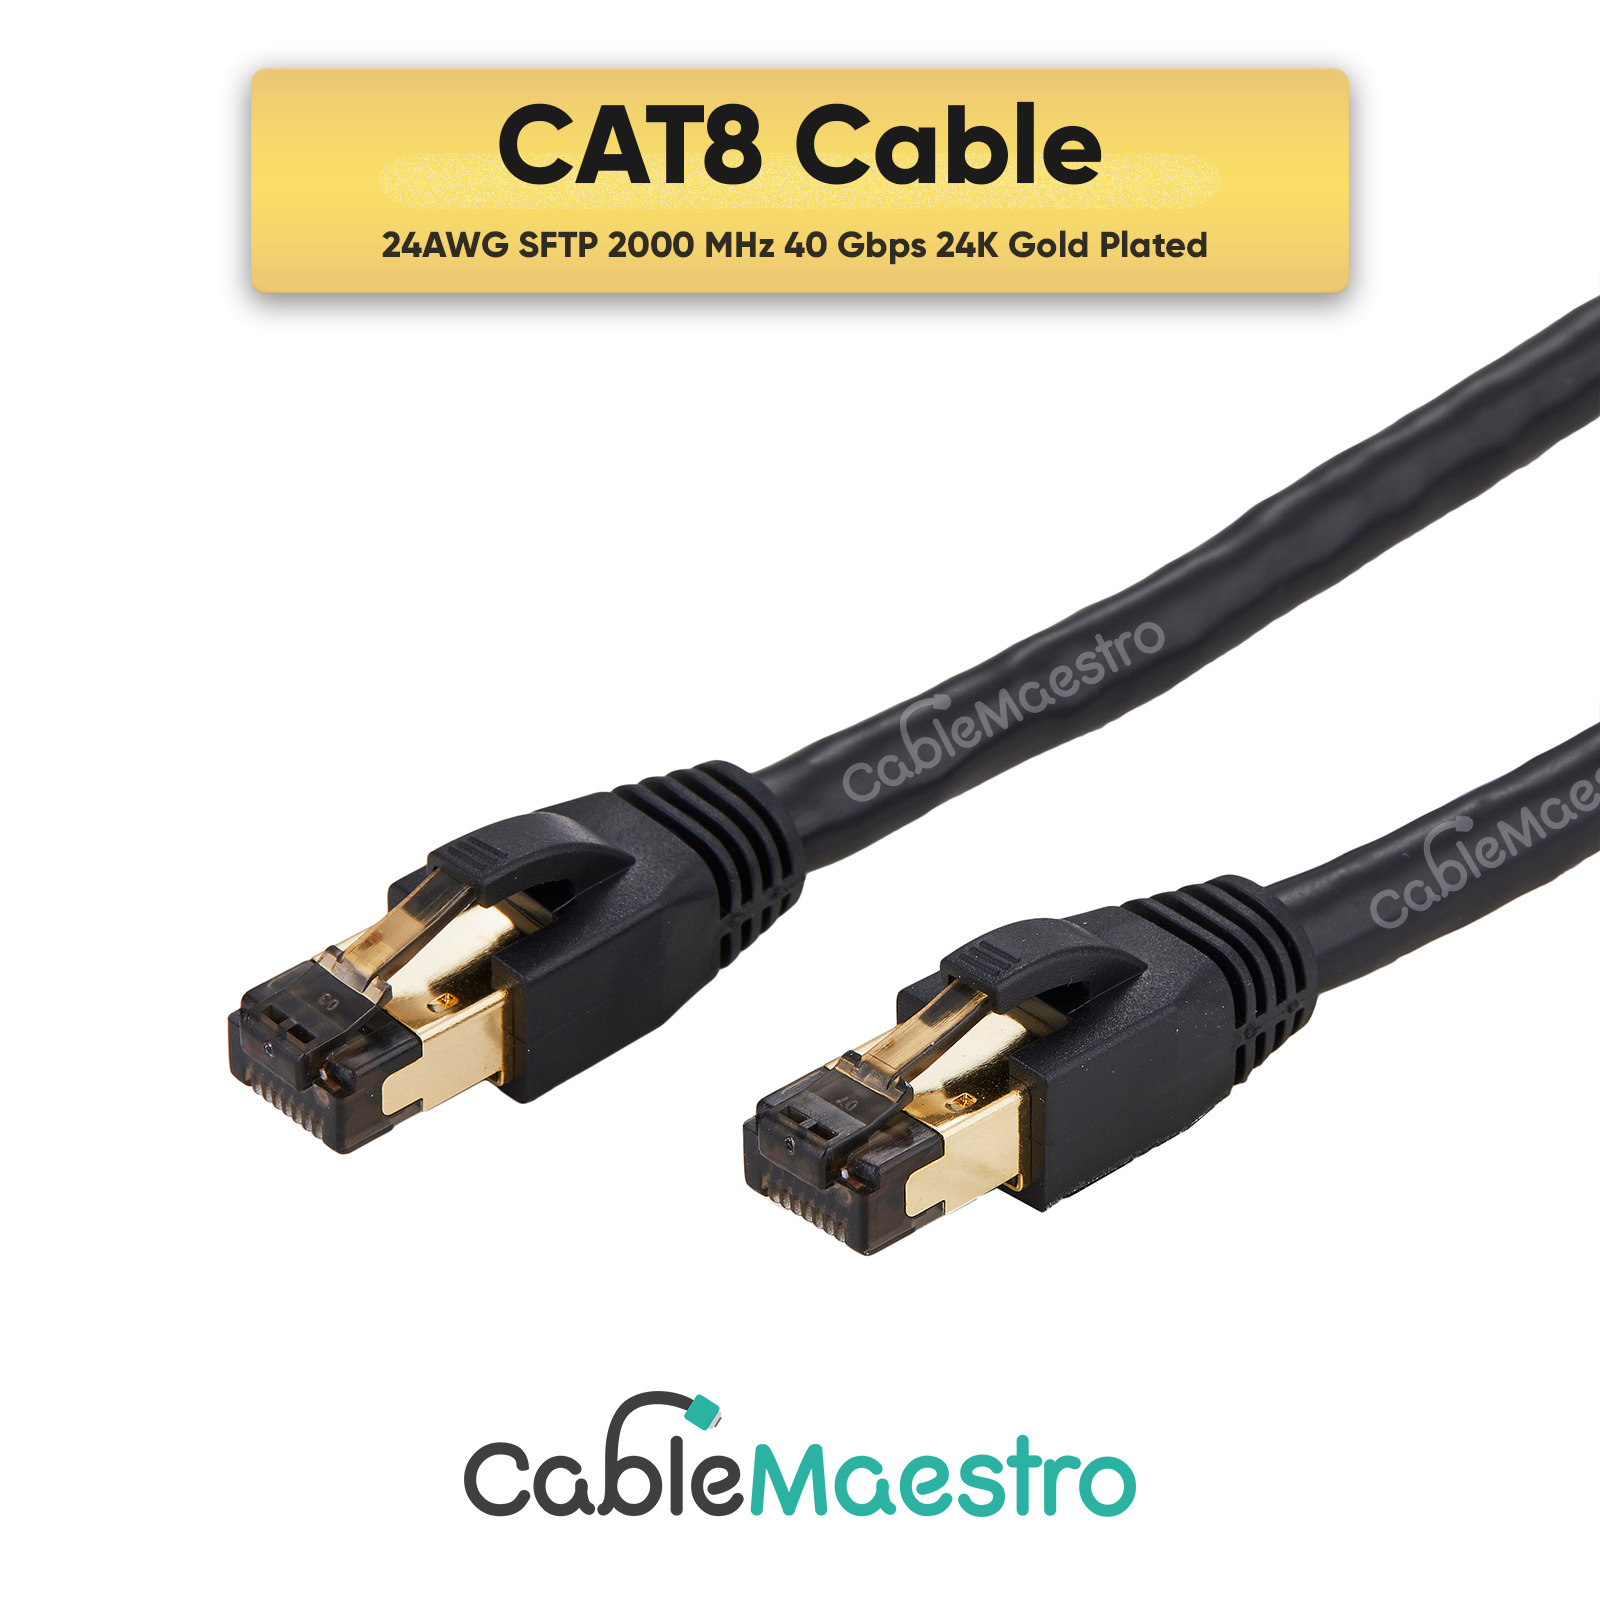 CAT8 Ethernet Cable Cord Patch Copper 26AWG SFTP Shielded RJ-45 0.5-75FT Lot